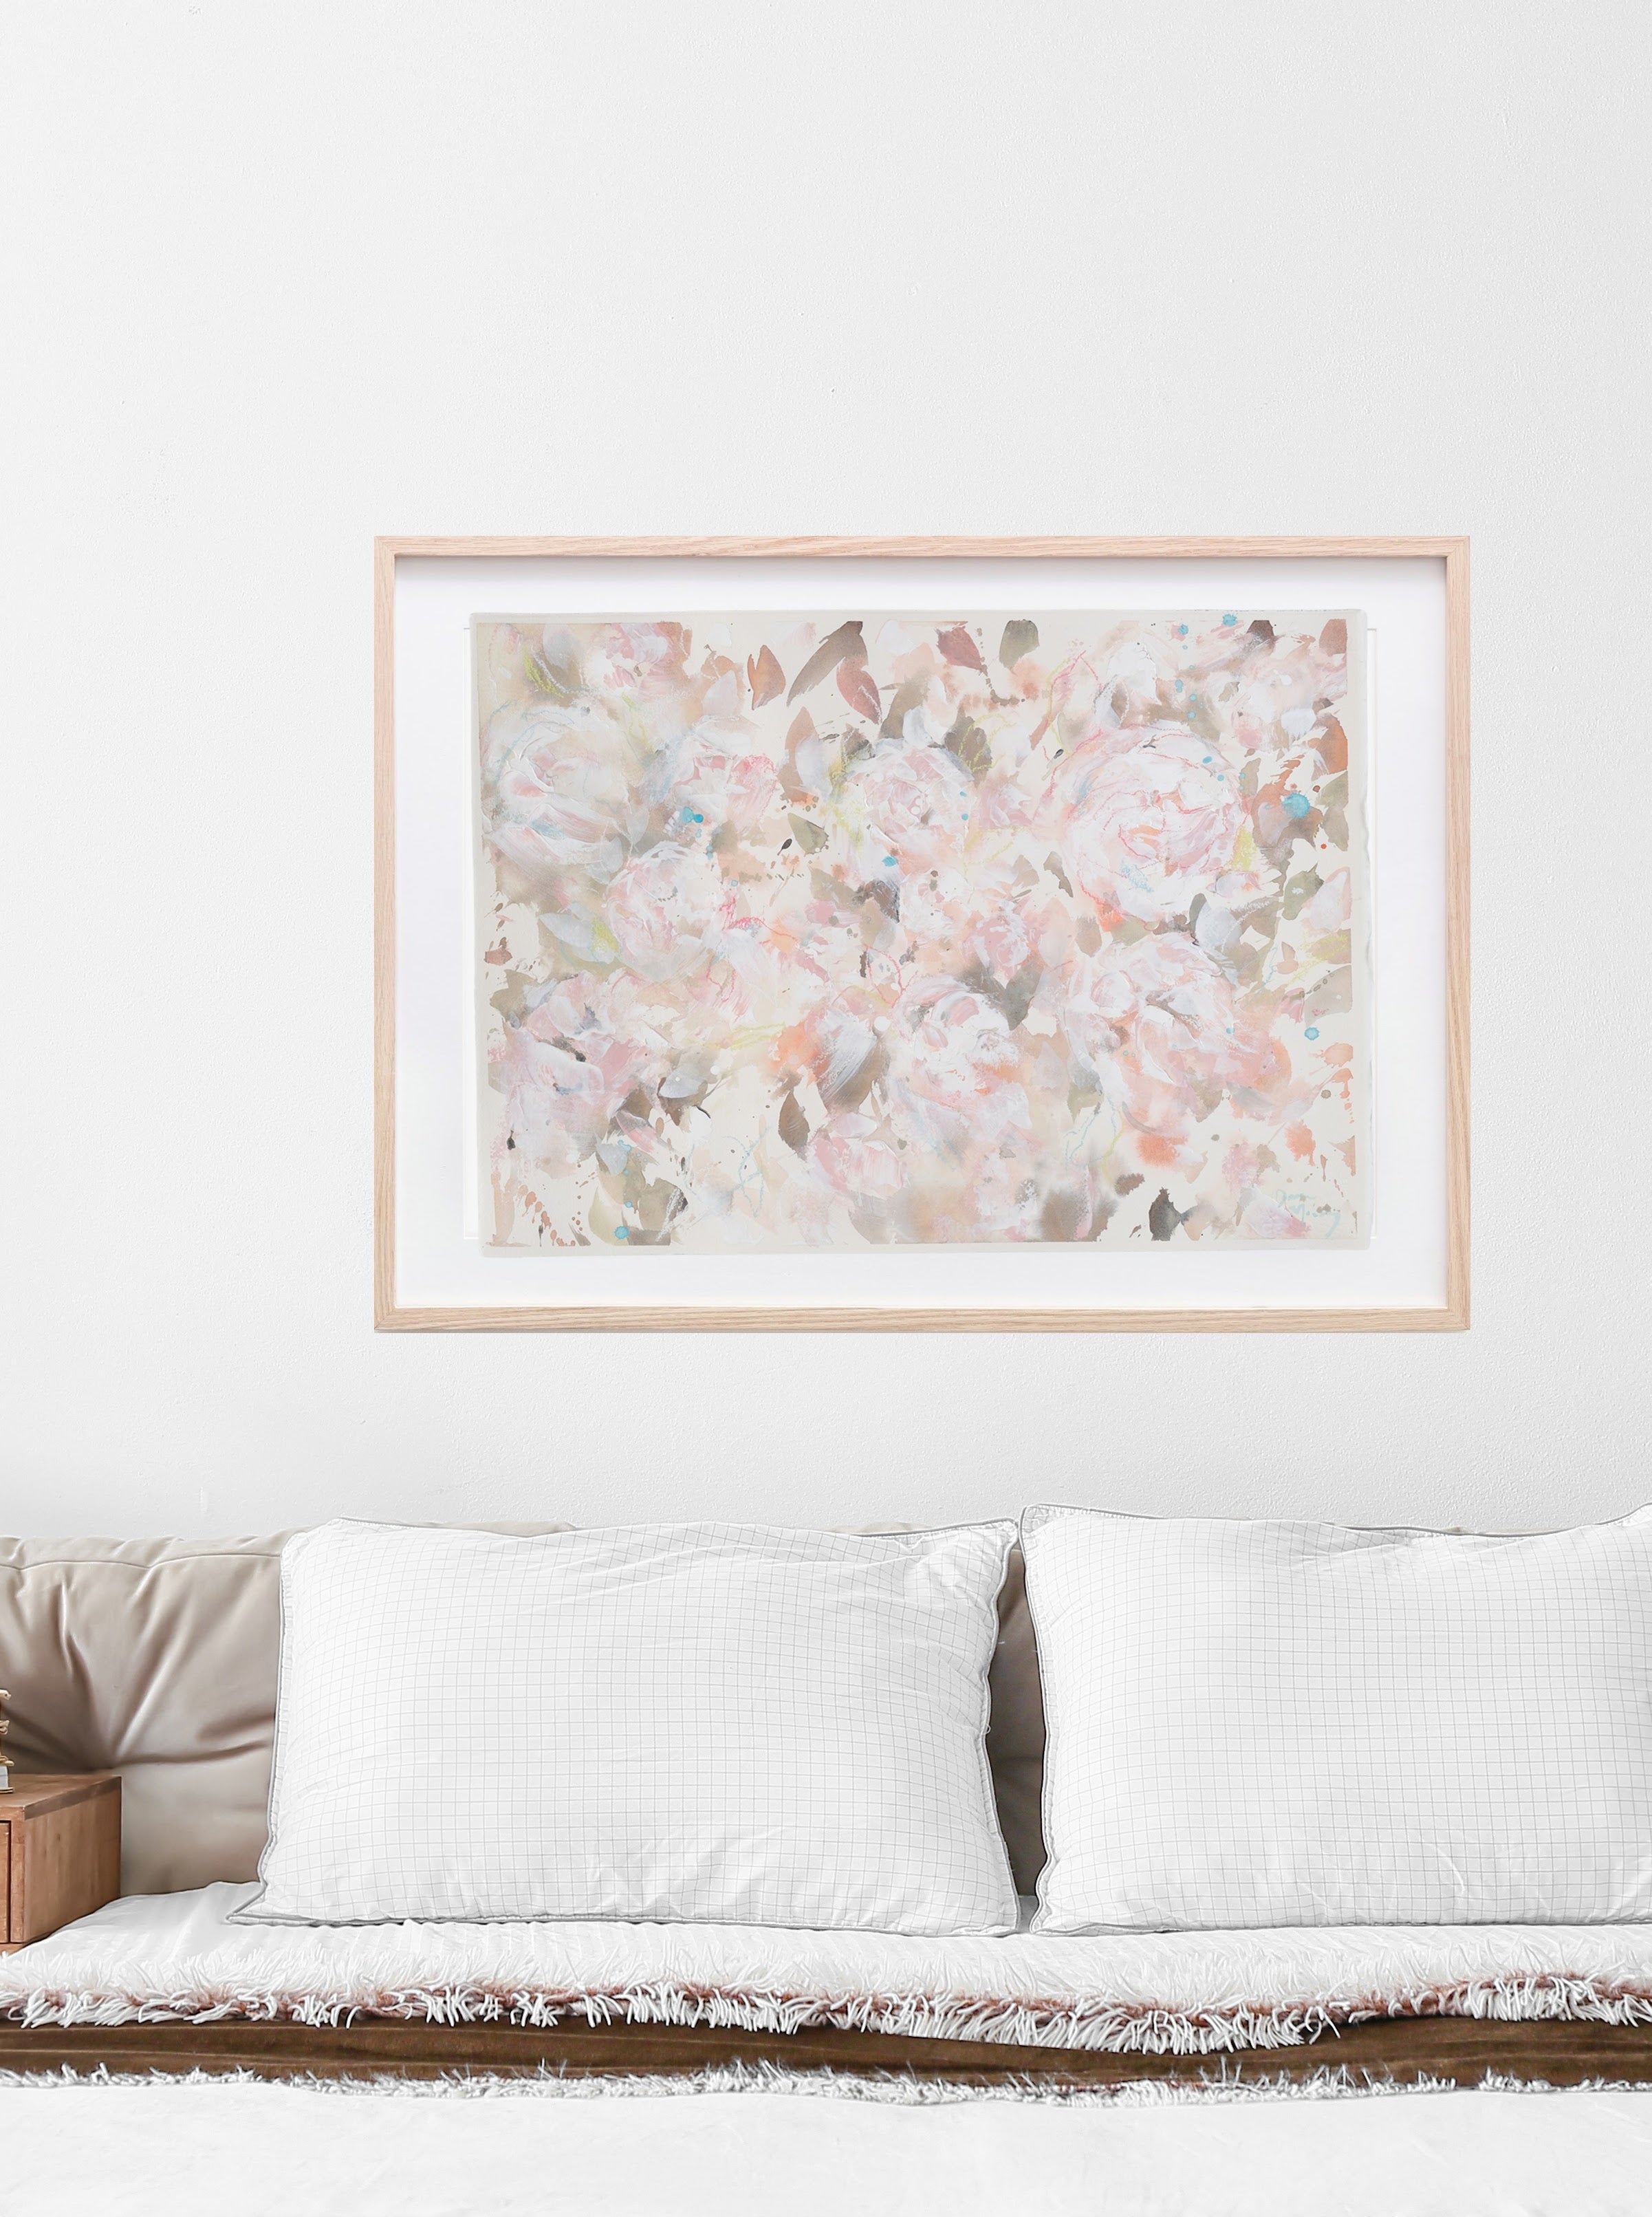 This warm toned mixed media floral painting on paper is soft and welcoming. With a colour palette of terracotta, blush, whites and aqua, this painting is complimentary to your home decor, inviting the viewer to pause and reflect.  Shown here in a bedroom. 